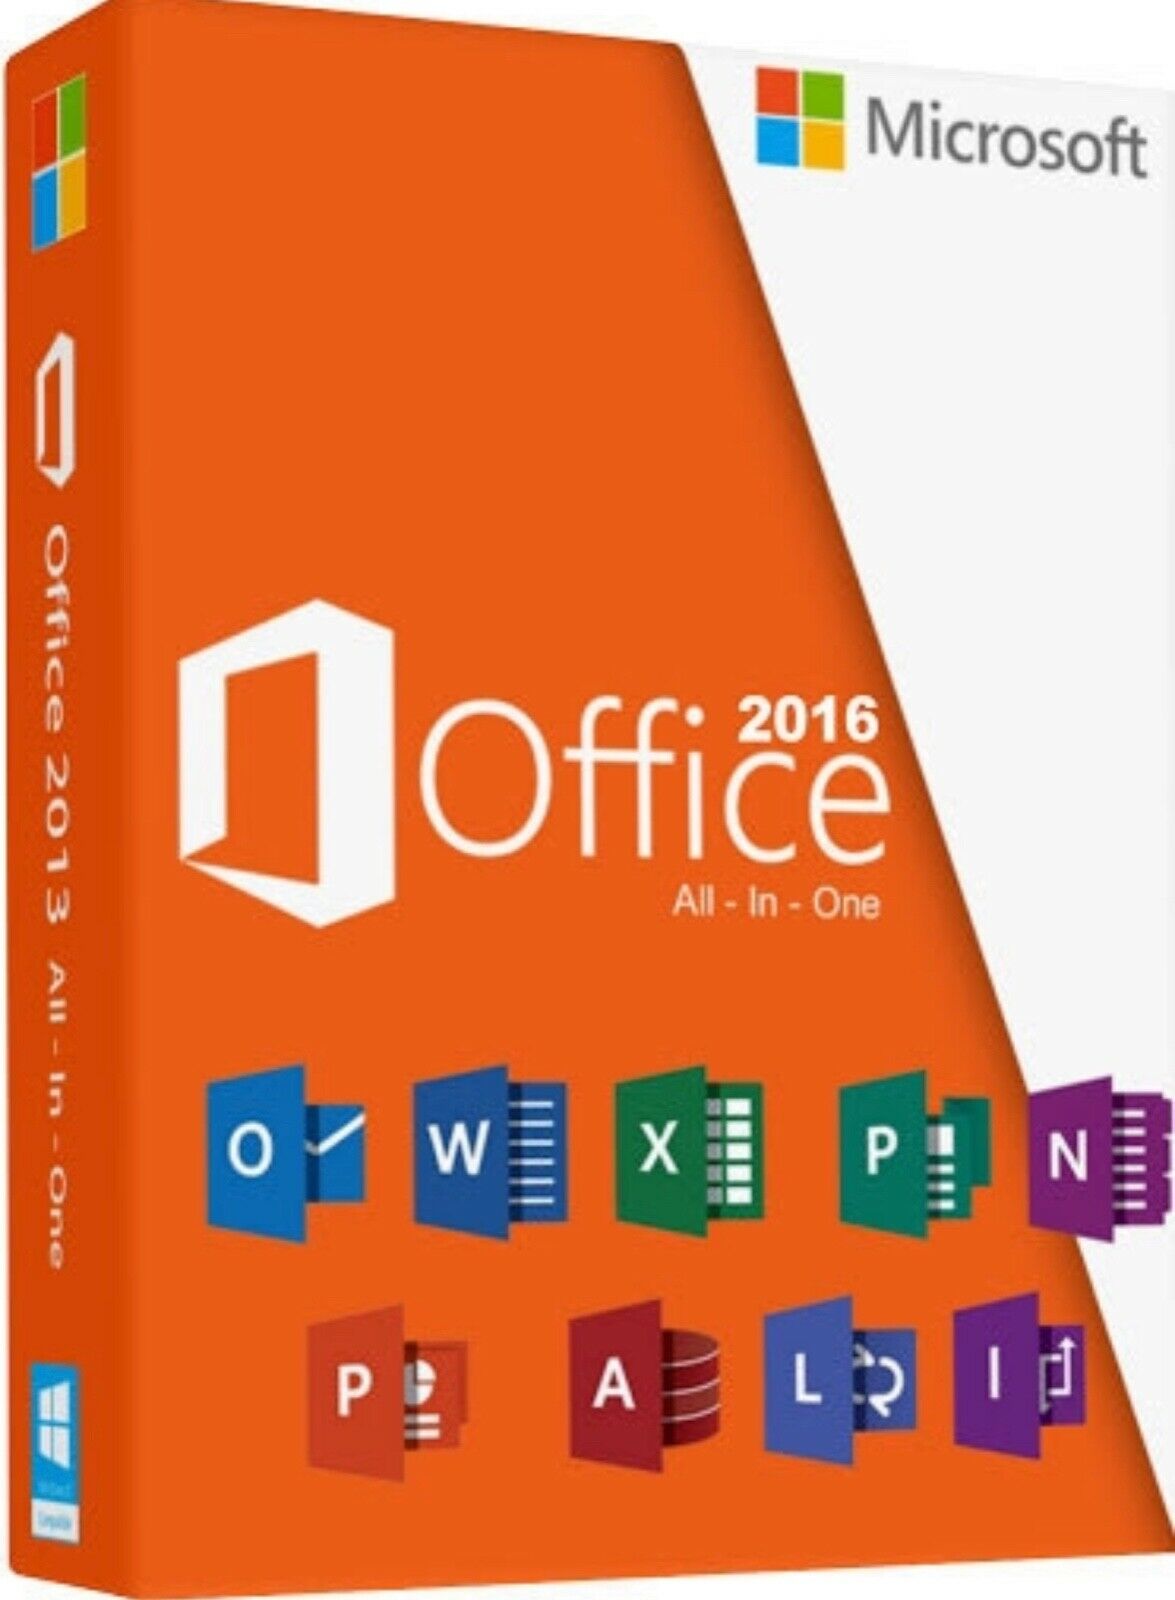 will office for mac 2016 have access database